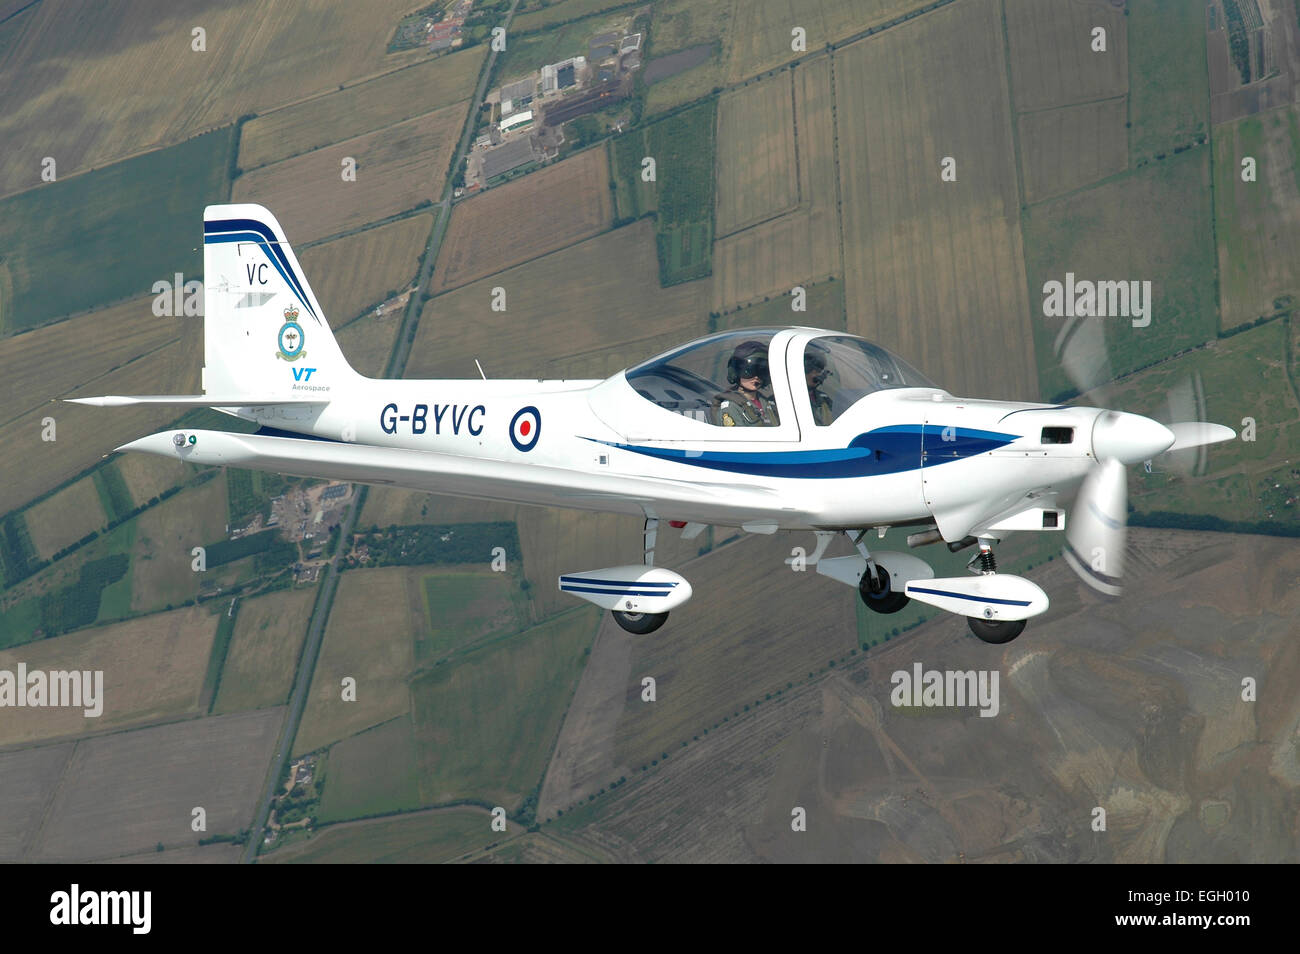 G-115 Tutor of the Cambridge University Air Squadron, Royal Air Force, taken in-flight over England. Stock Photo